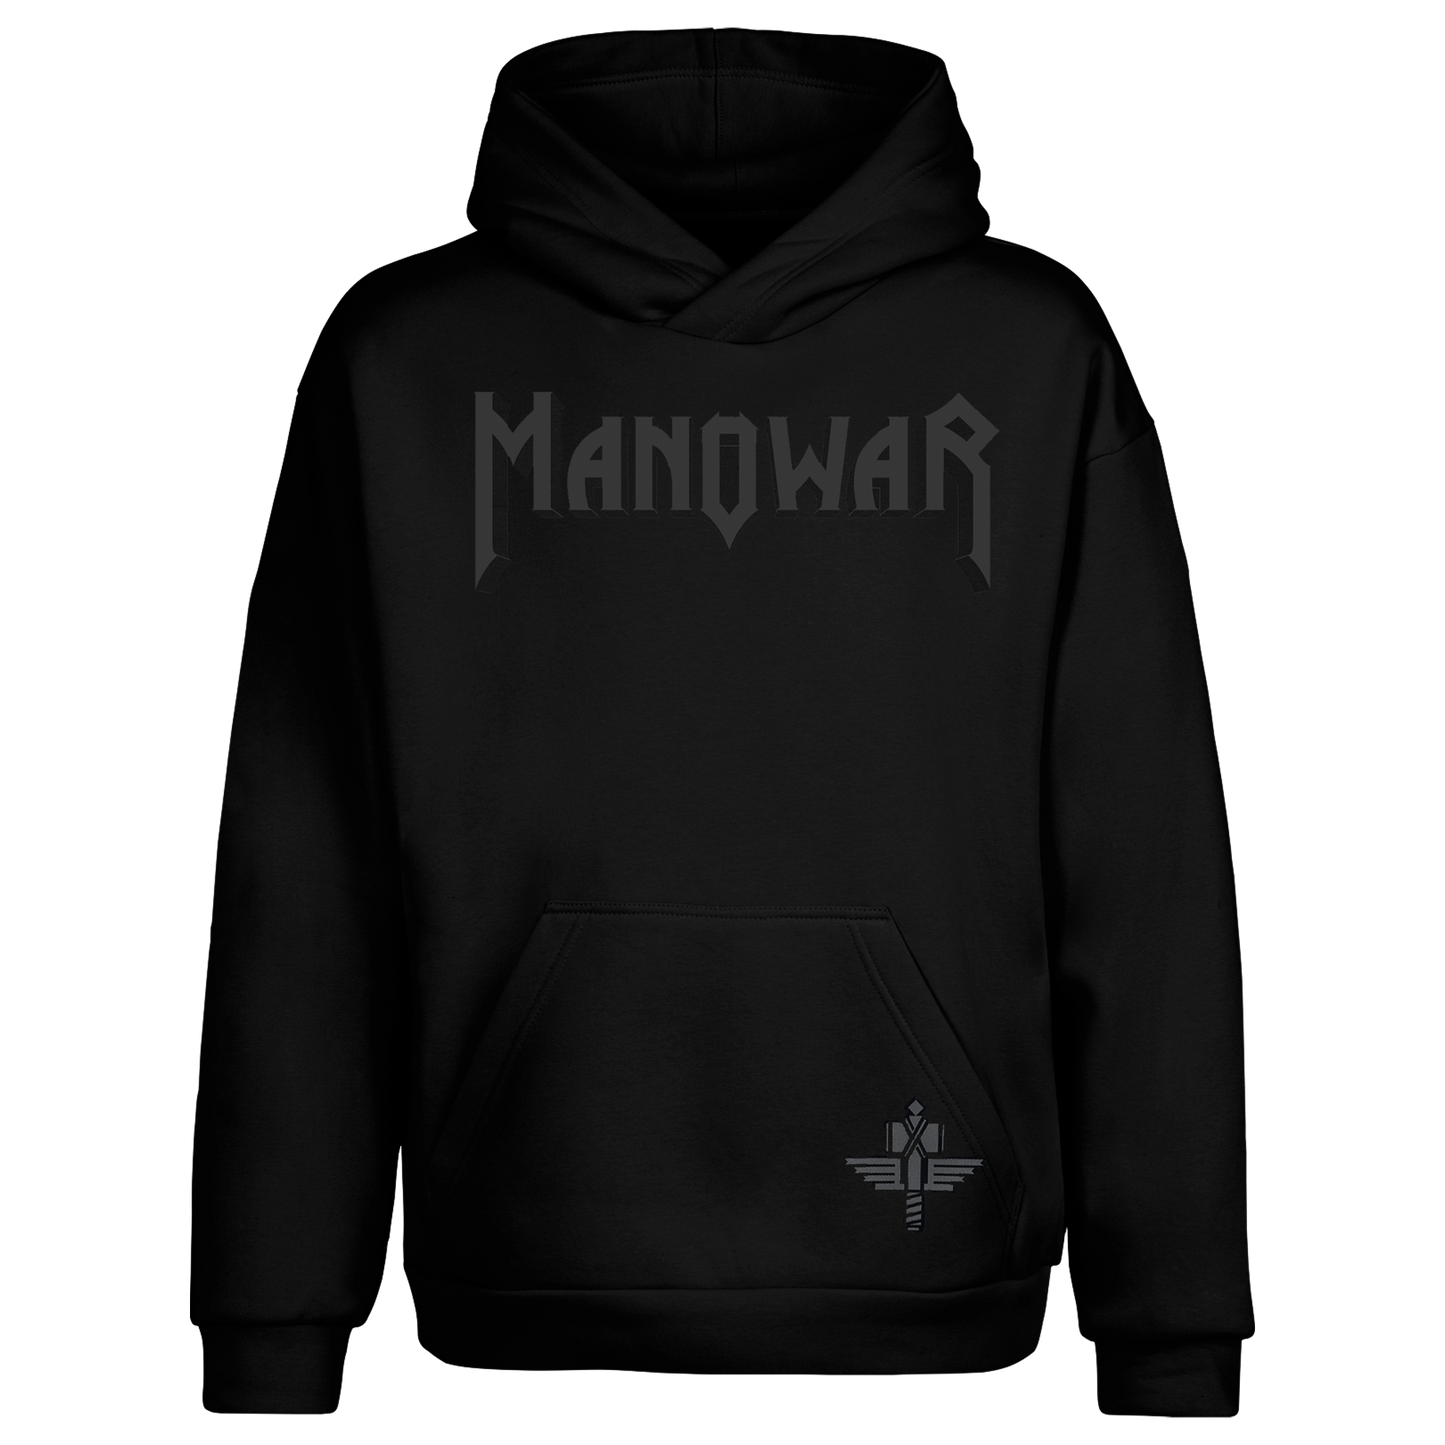 Manowar Hoodie With Black MANOWAR Logo And SOTH Patch